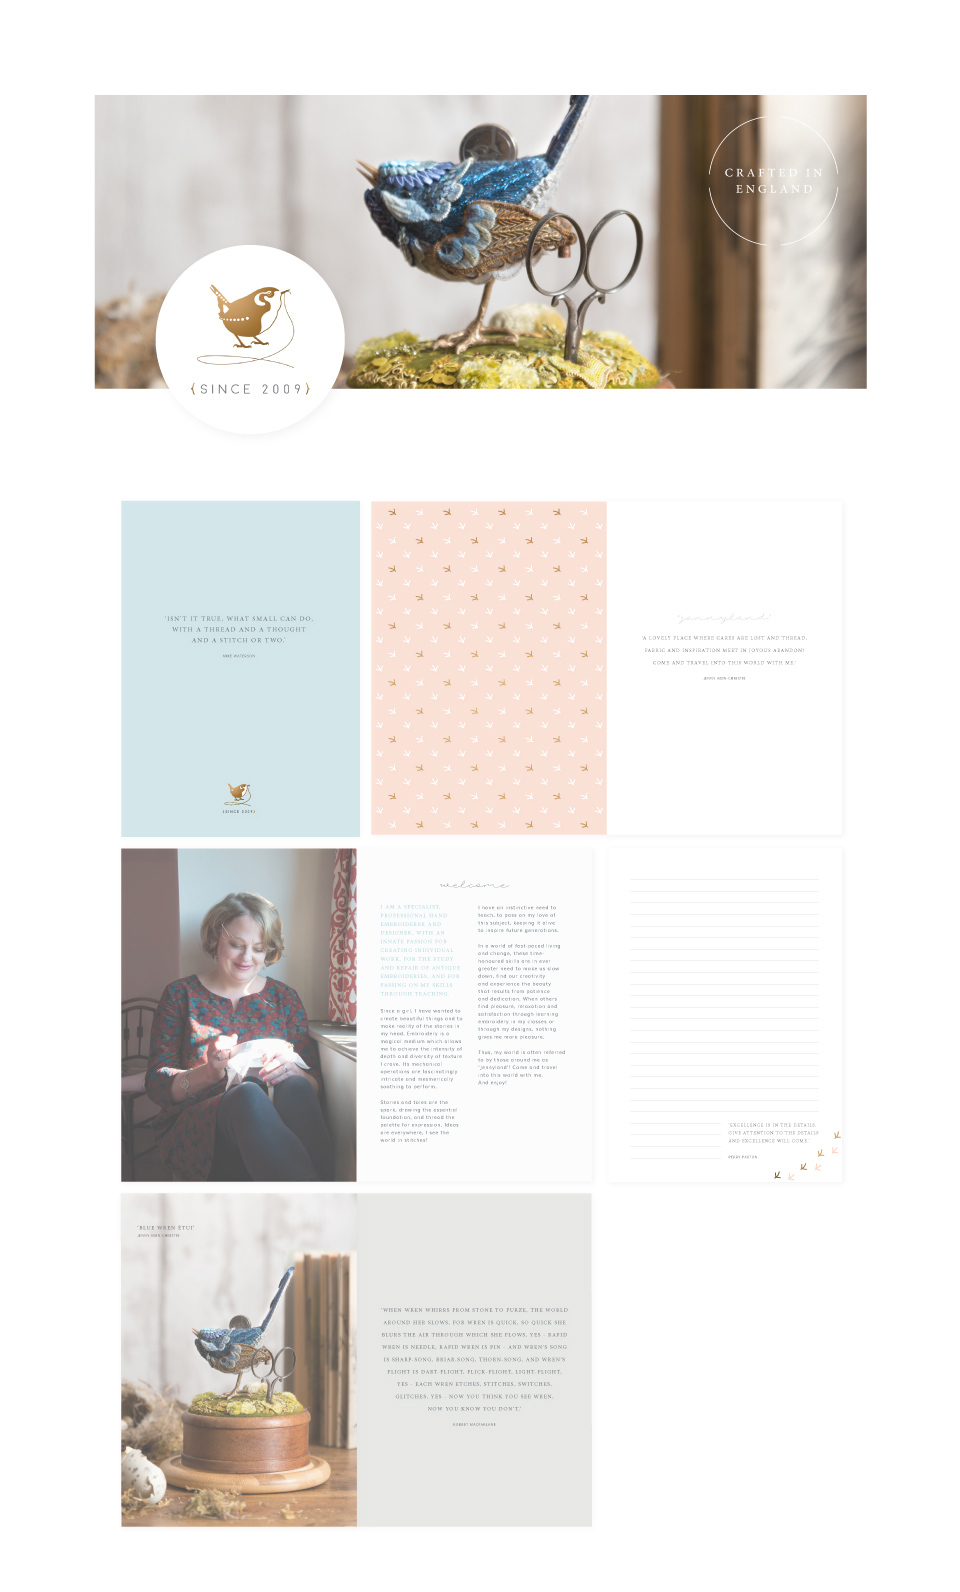 Facebook graphics and spreads taken from a bespoke notebook, designed for Jenny Adin-Christie.